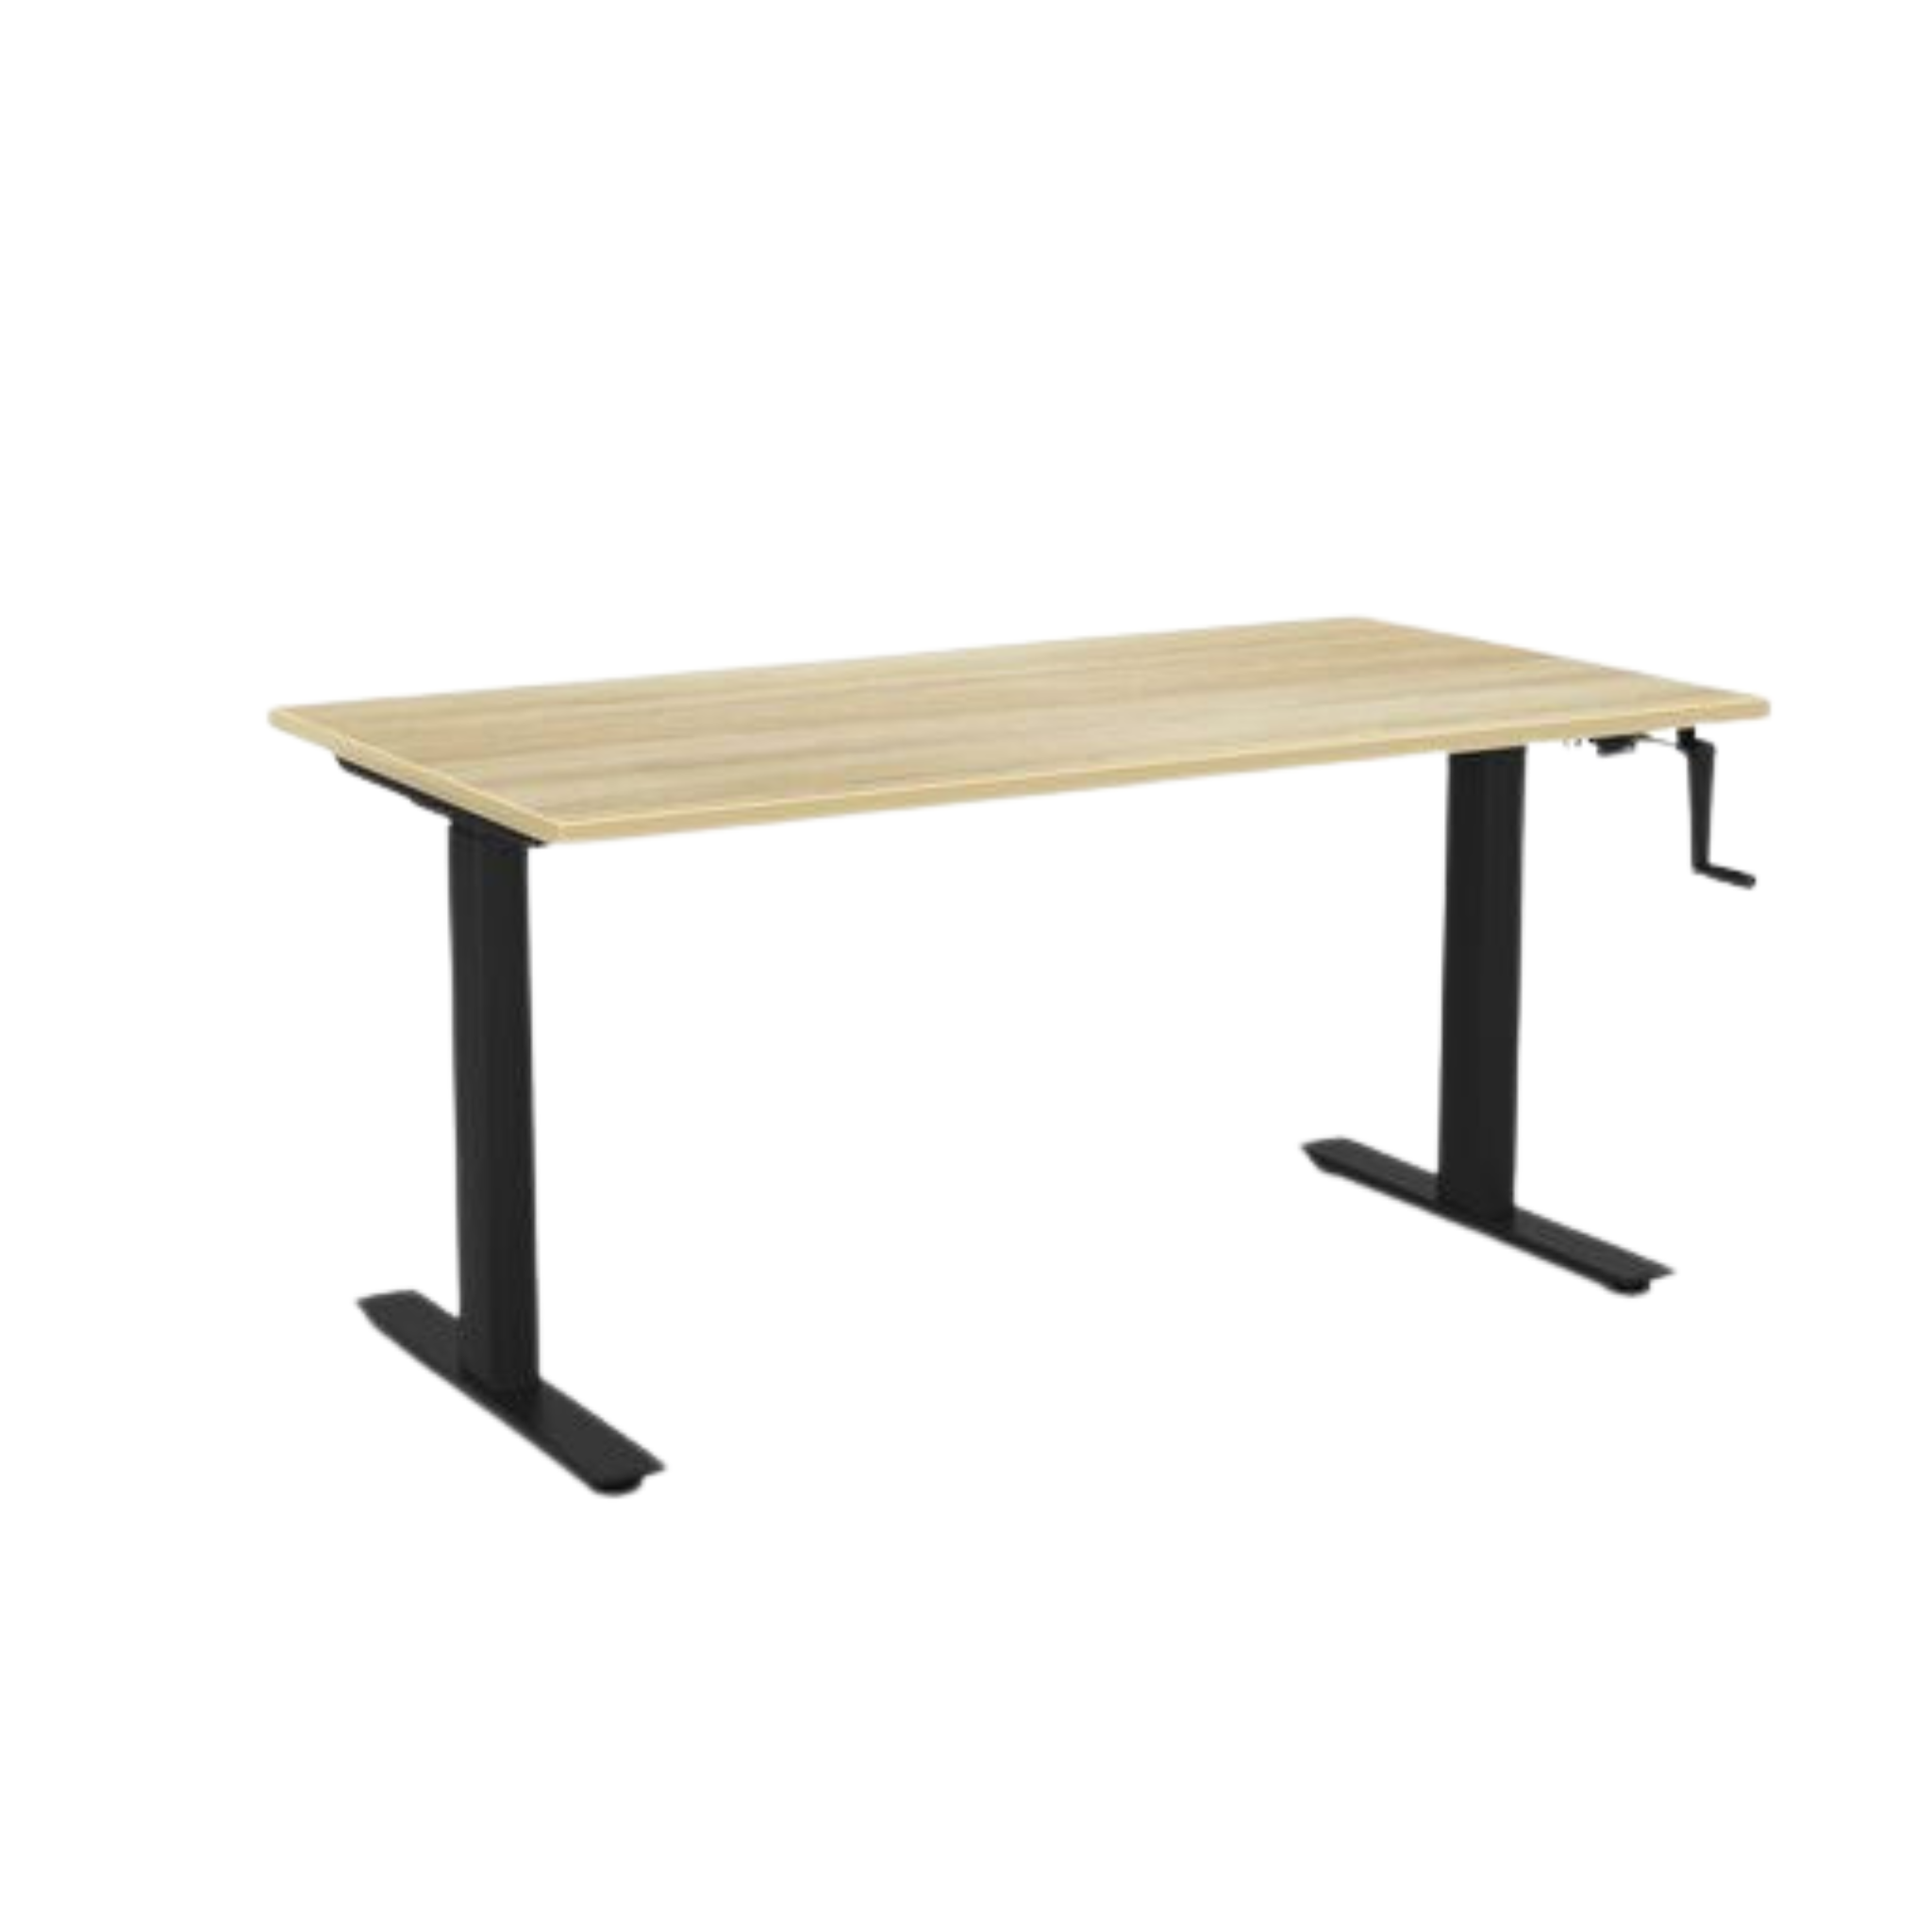 Agile winder sit to stand desk with black frame and atlantic oak top